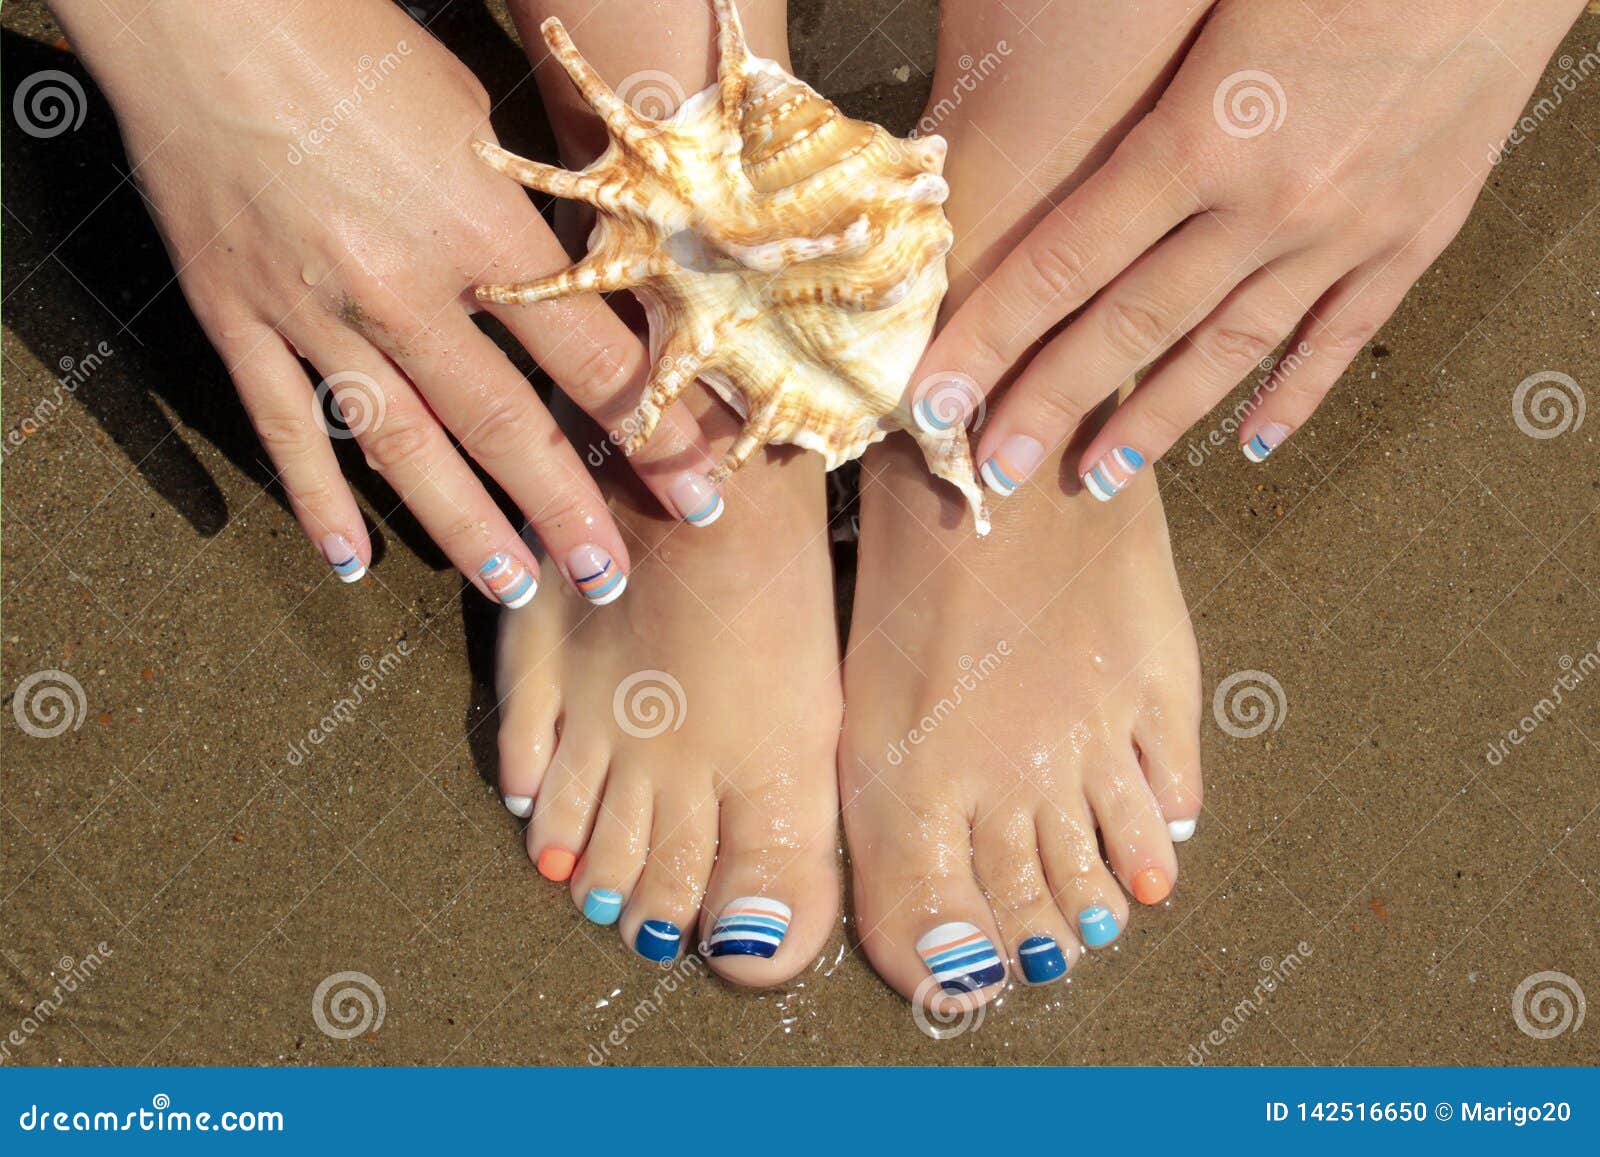 Marine French Manicure and Pedicure with Blue and Orange Stripes on Short  Nails on the Coast Stock Photo - Image of fashionable, nails: 142516650